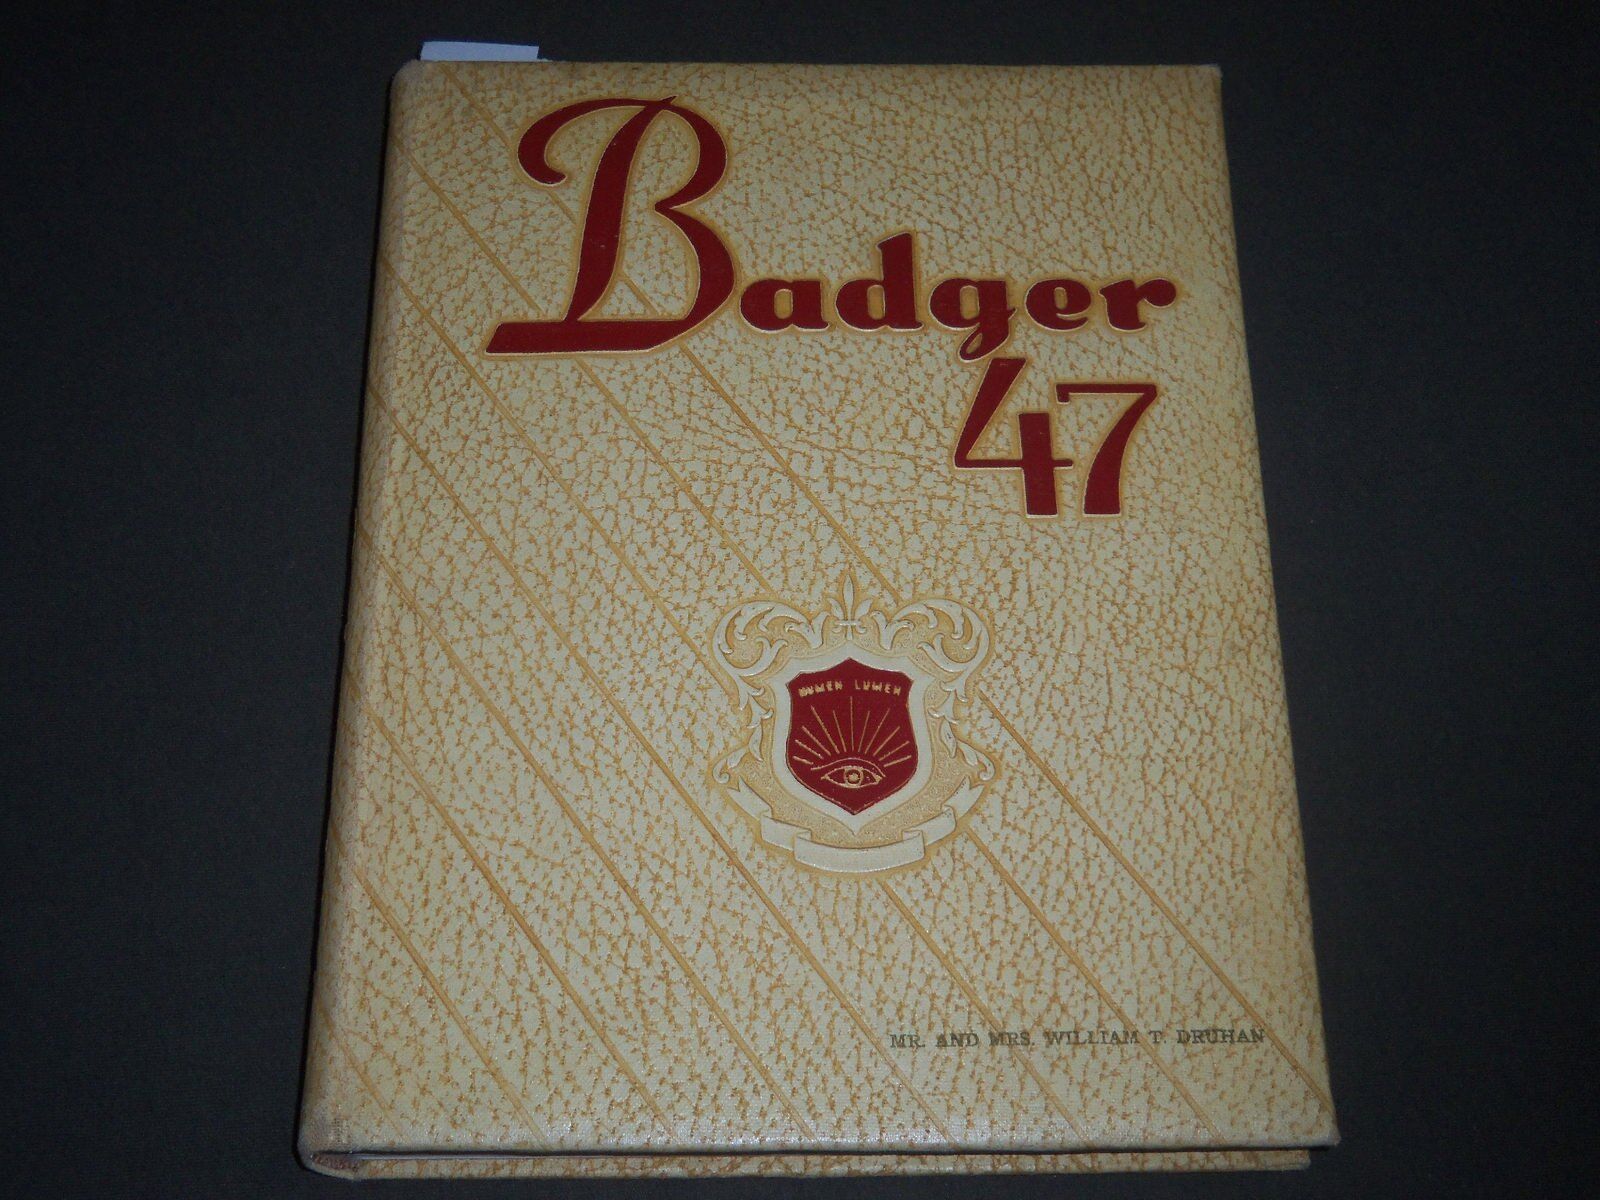 1947 THE BADGER UNIVERSITY OF WISCONSIN YEARBOOK - MADISON WI - PHOTOS - YB 1253